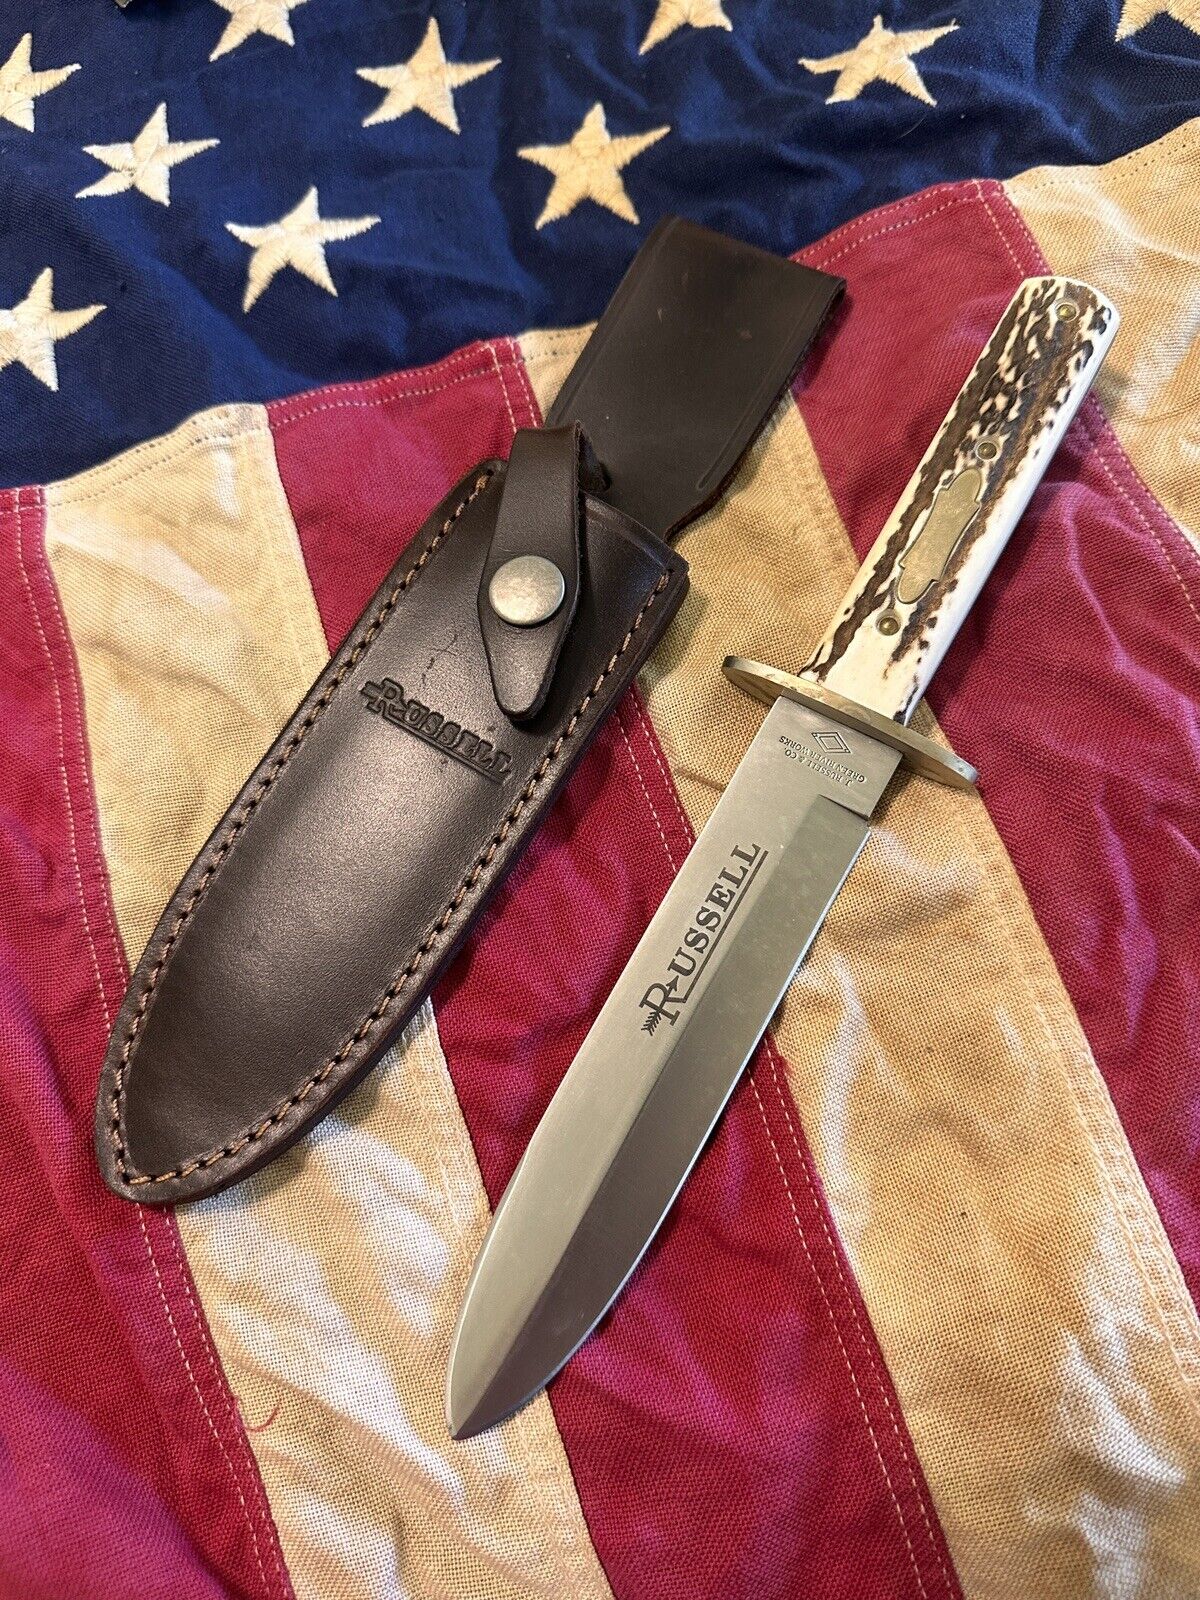 J Russell & Co Green River Works Bowie Knife 